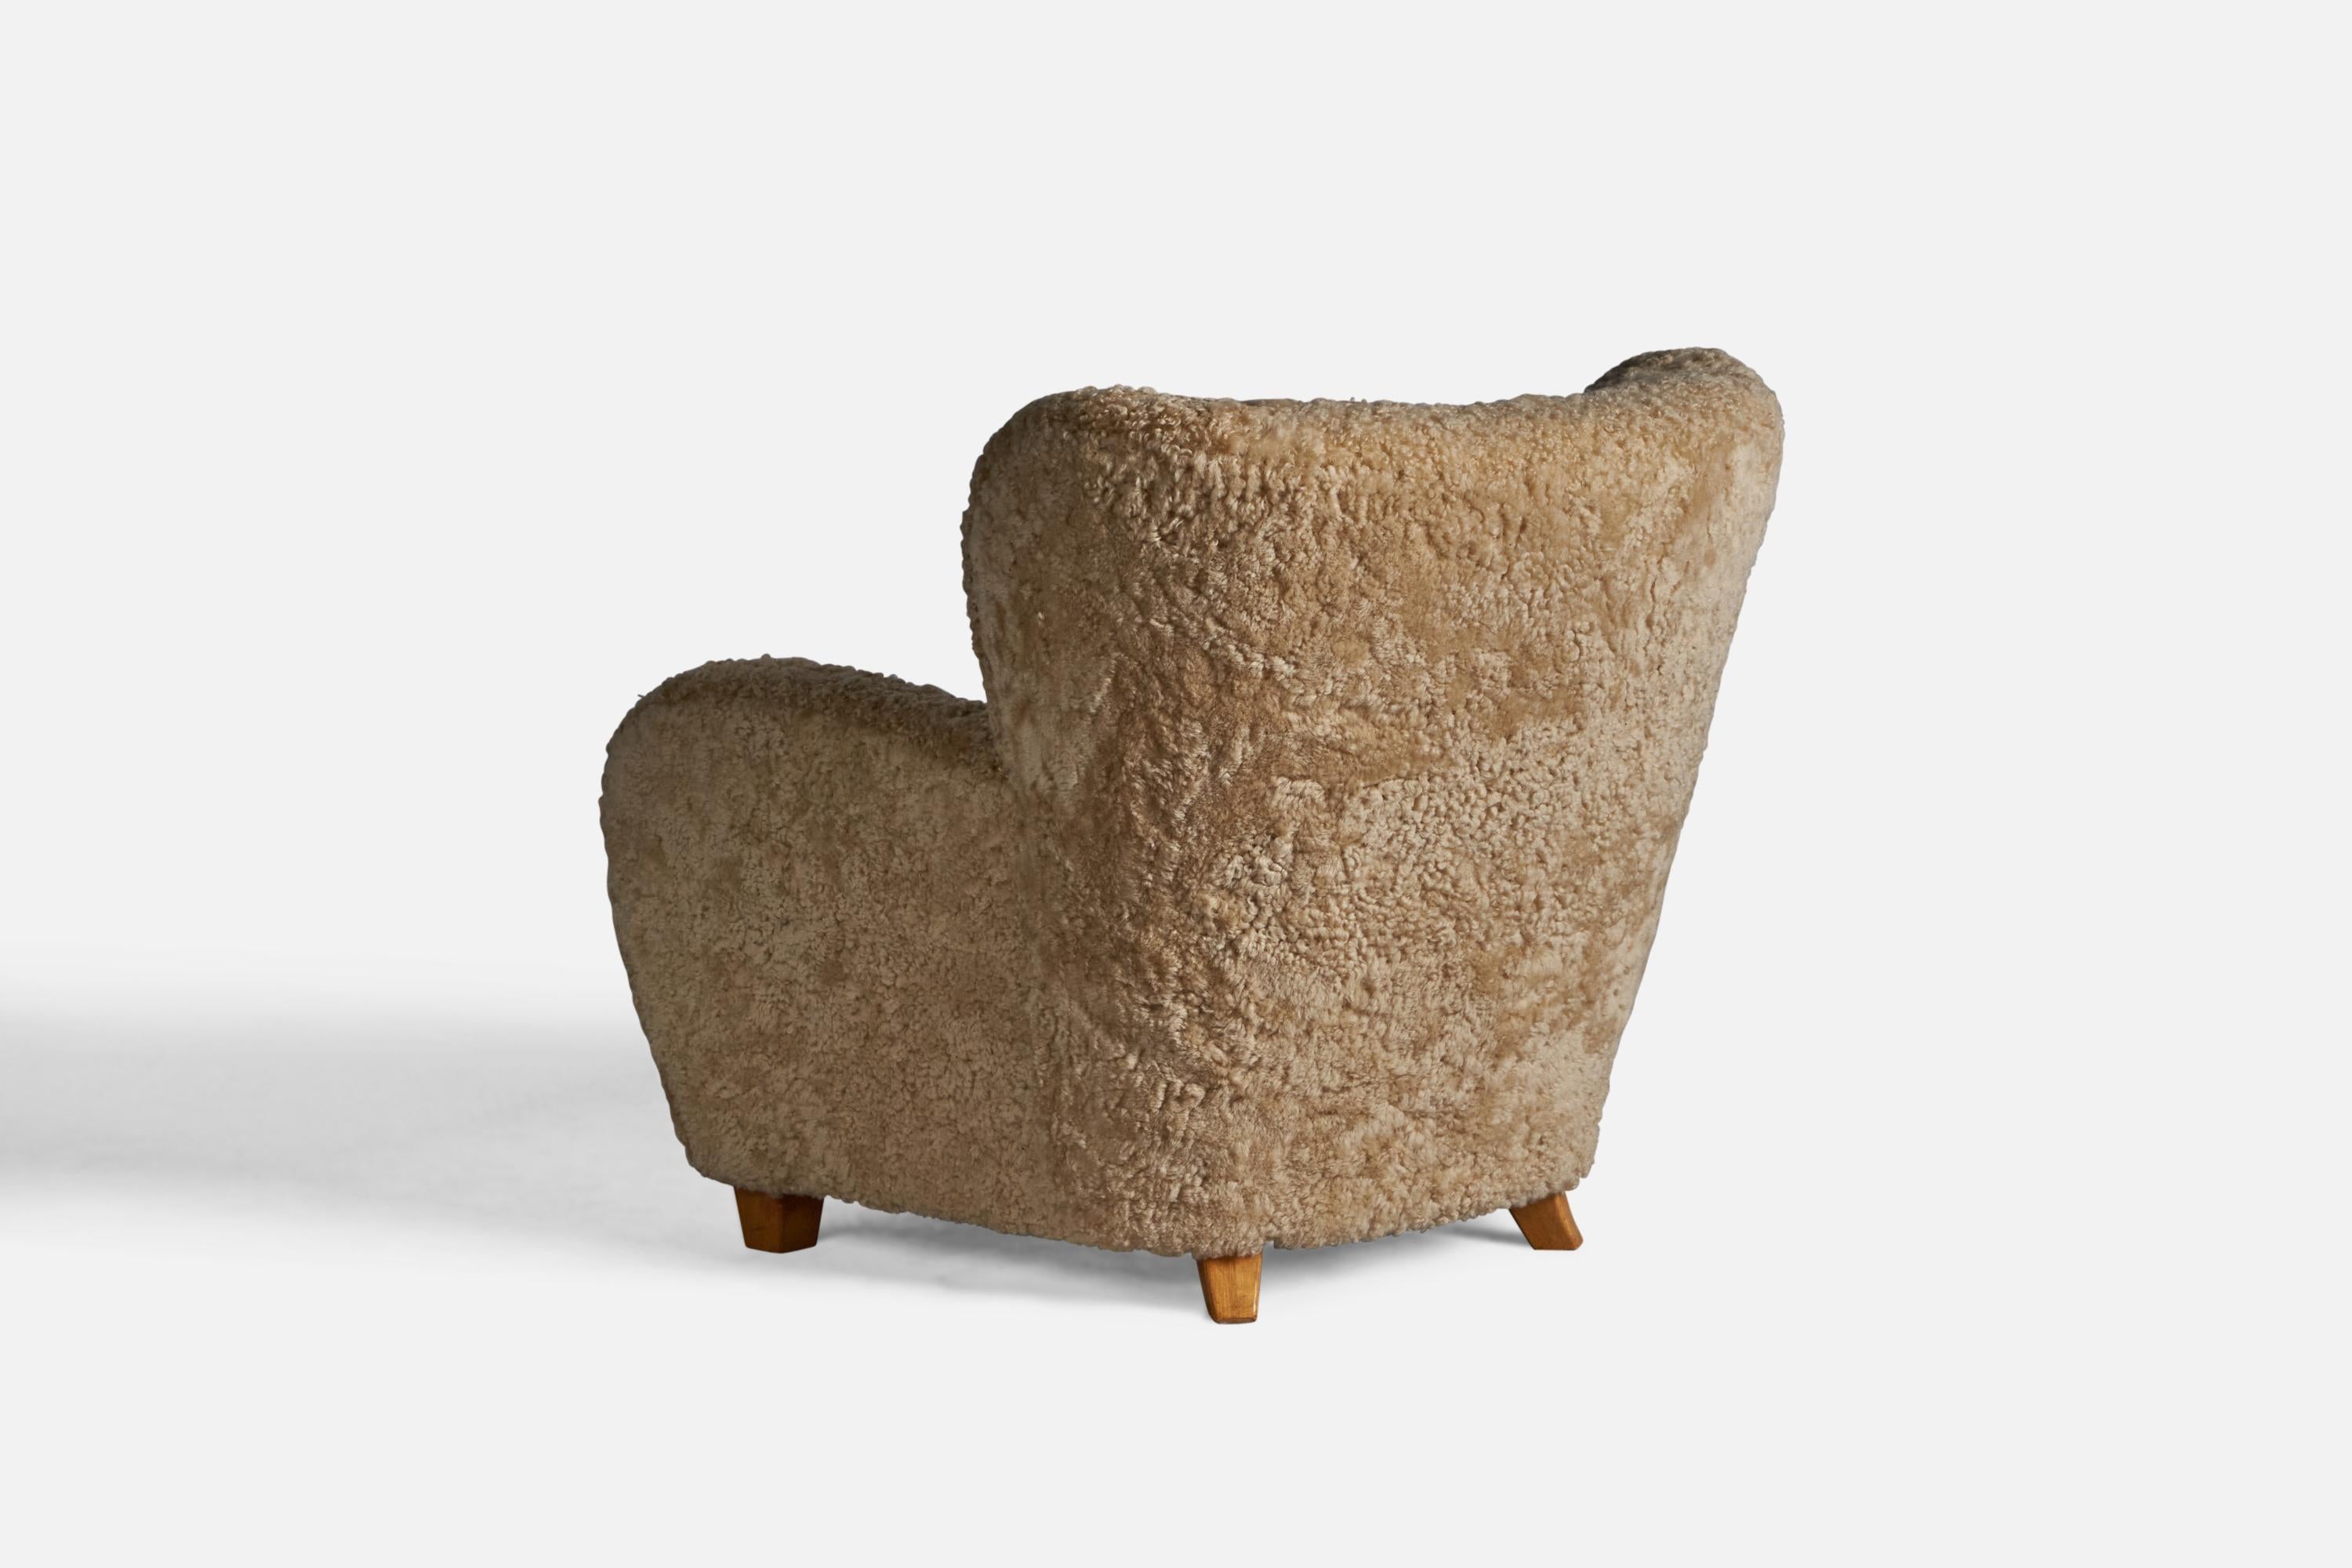 Mid-20th Century Finnish Designer, Organic Lounge Chairs, Shearling, Wood, Finland, 1940s For Sale